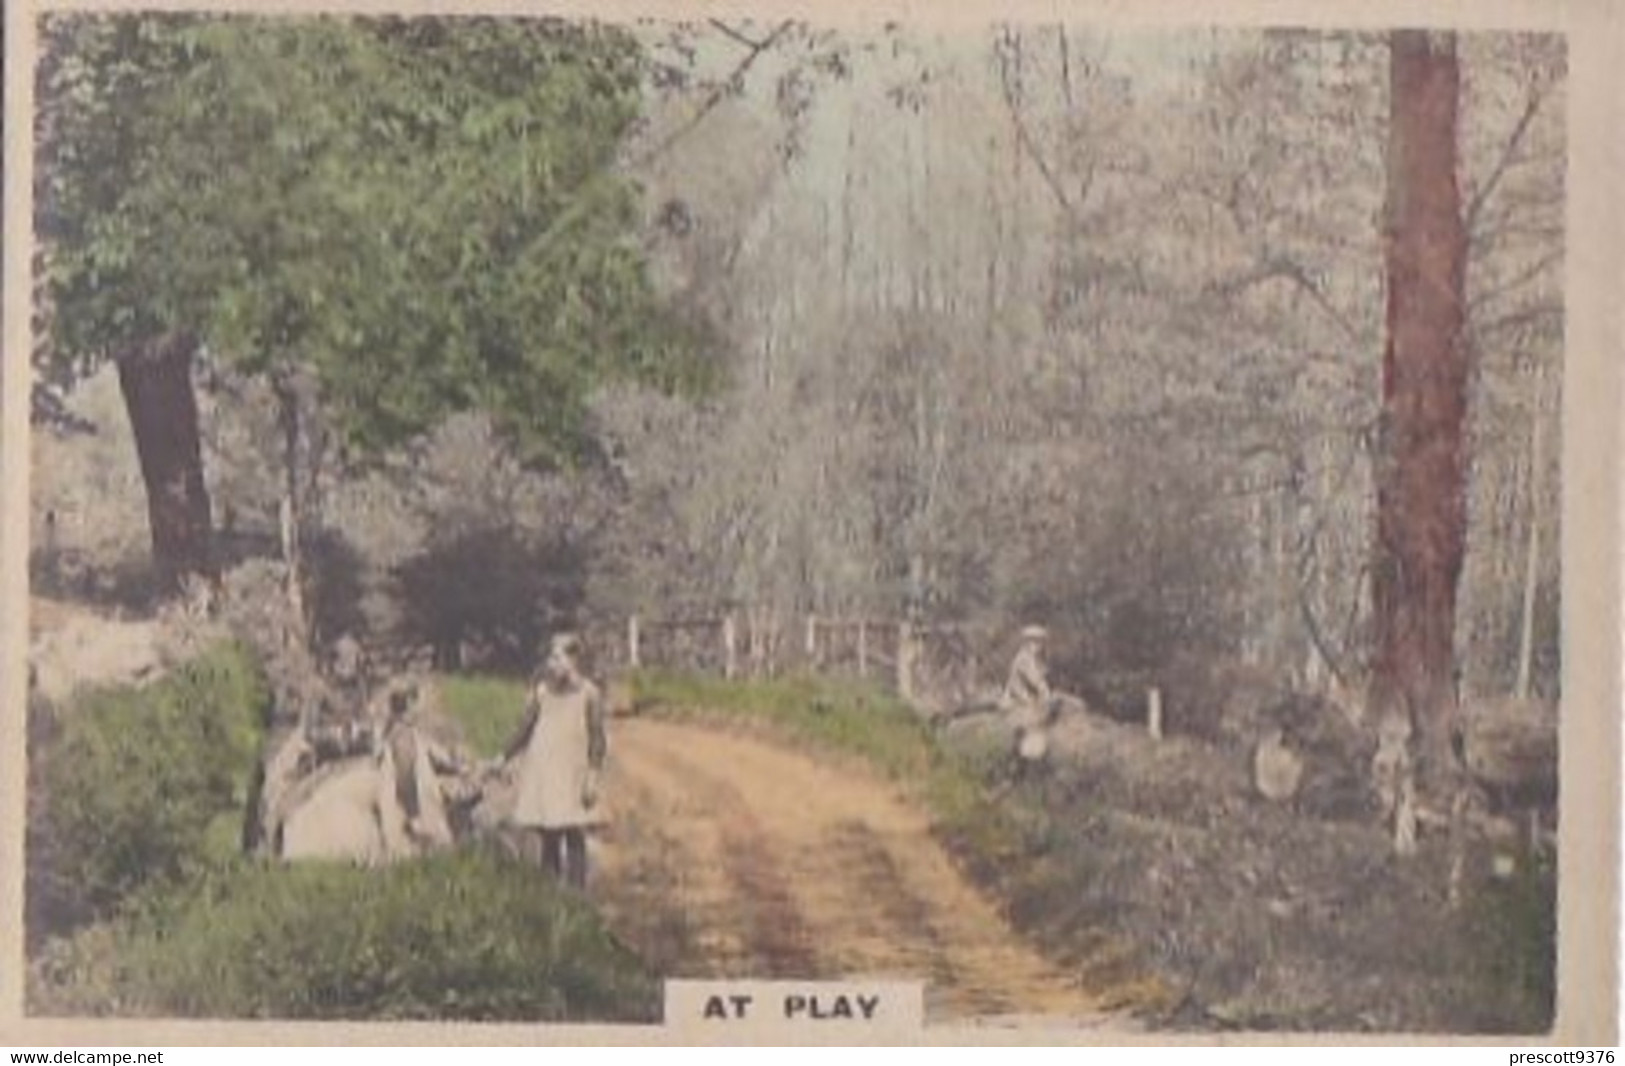 31 Children At Play  - Camera Studies 1926 - Hand Coloured RP, W Verse- Cavanders Cigarette Card - 5x8 Cm - - Other Brands